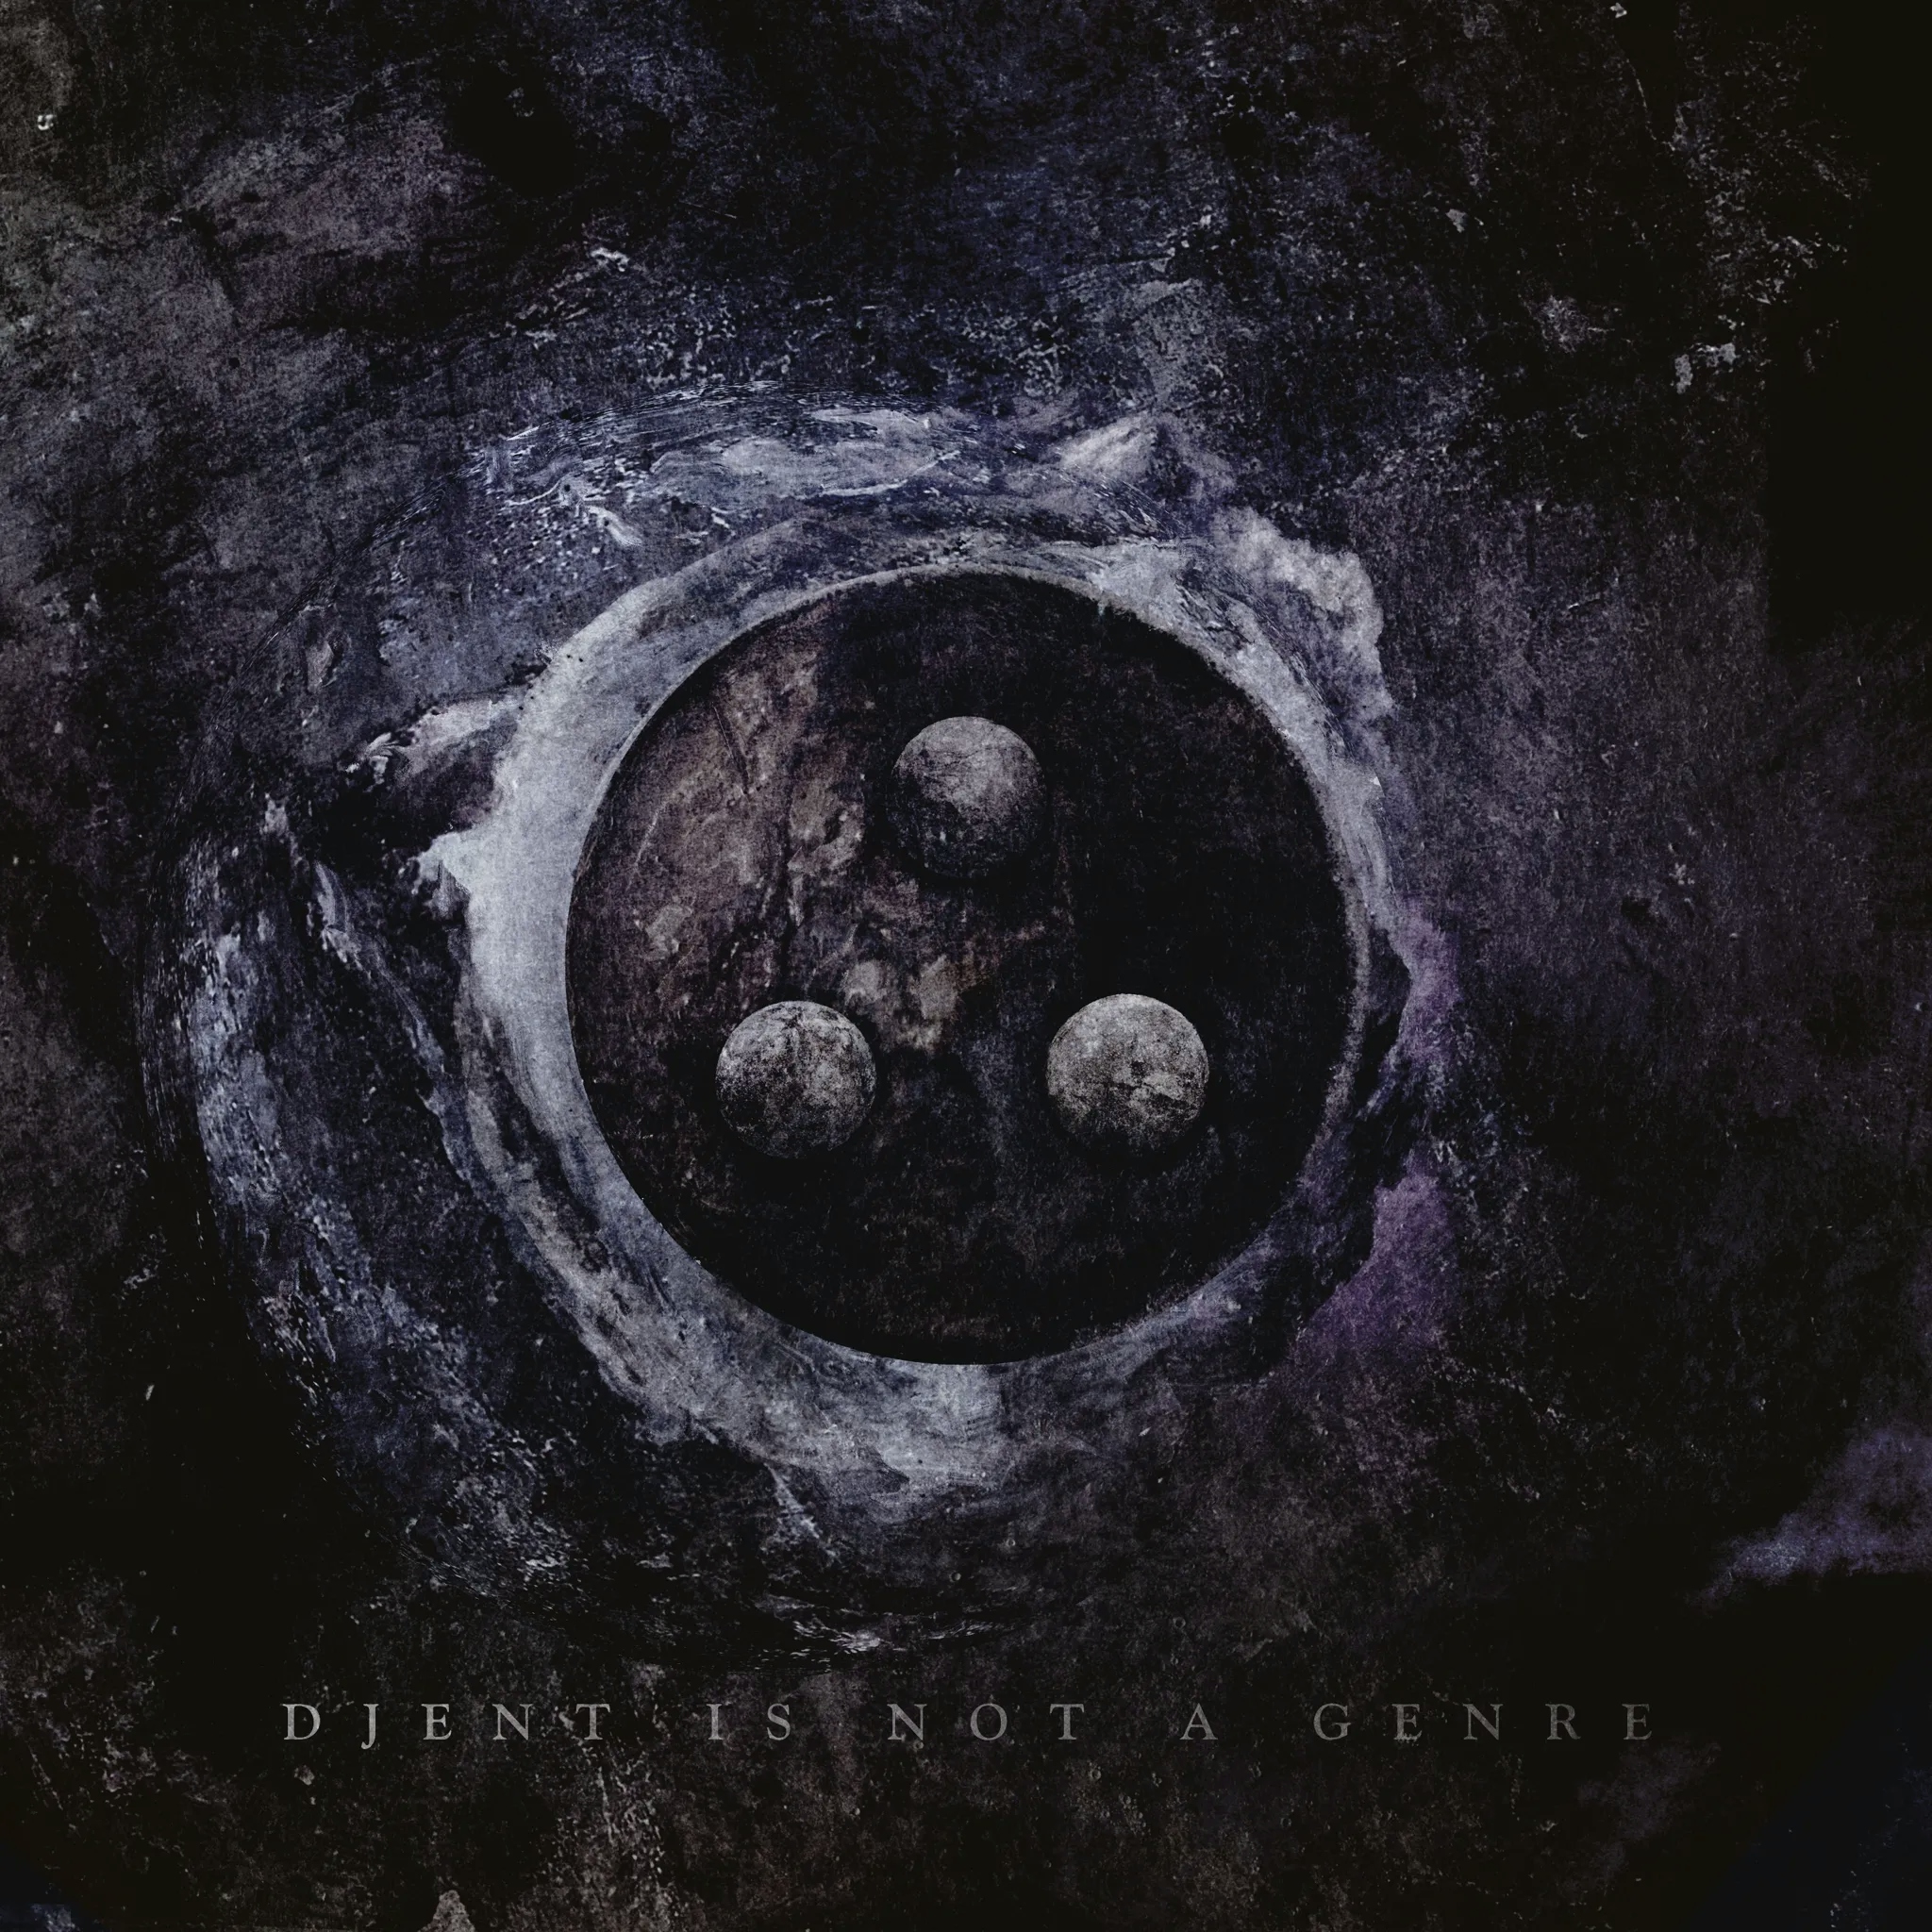 Album artwork for Album artwork for Periphery V: Djent Is Not A Genre by Periphery by Periphery V: Djent Is Not A Genre - Periphery